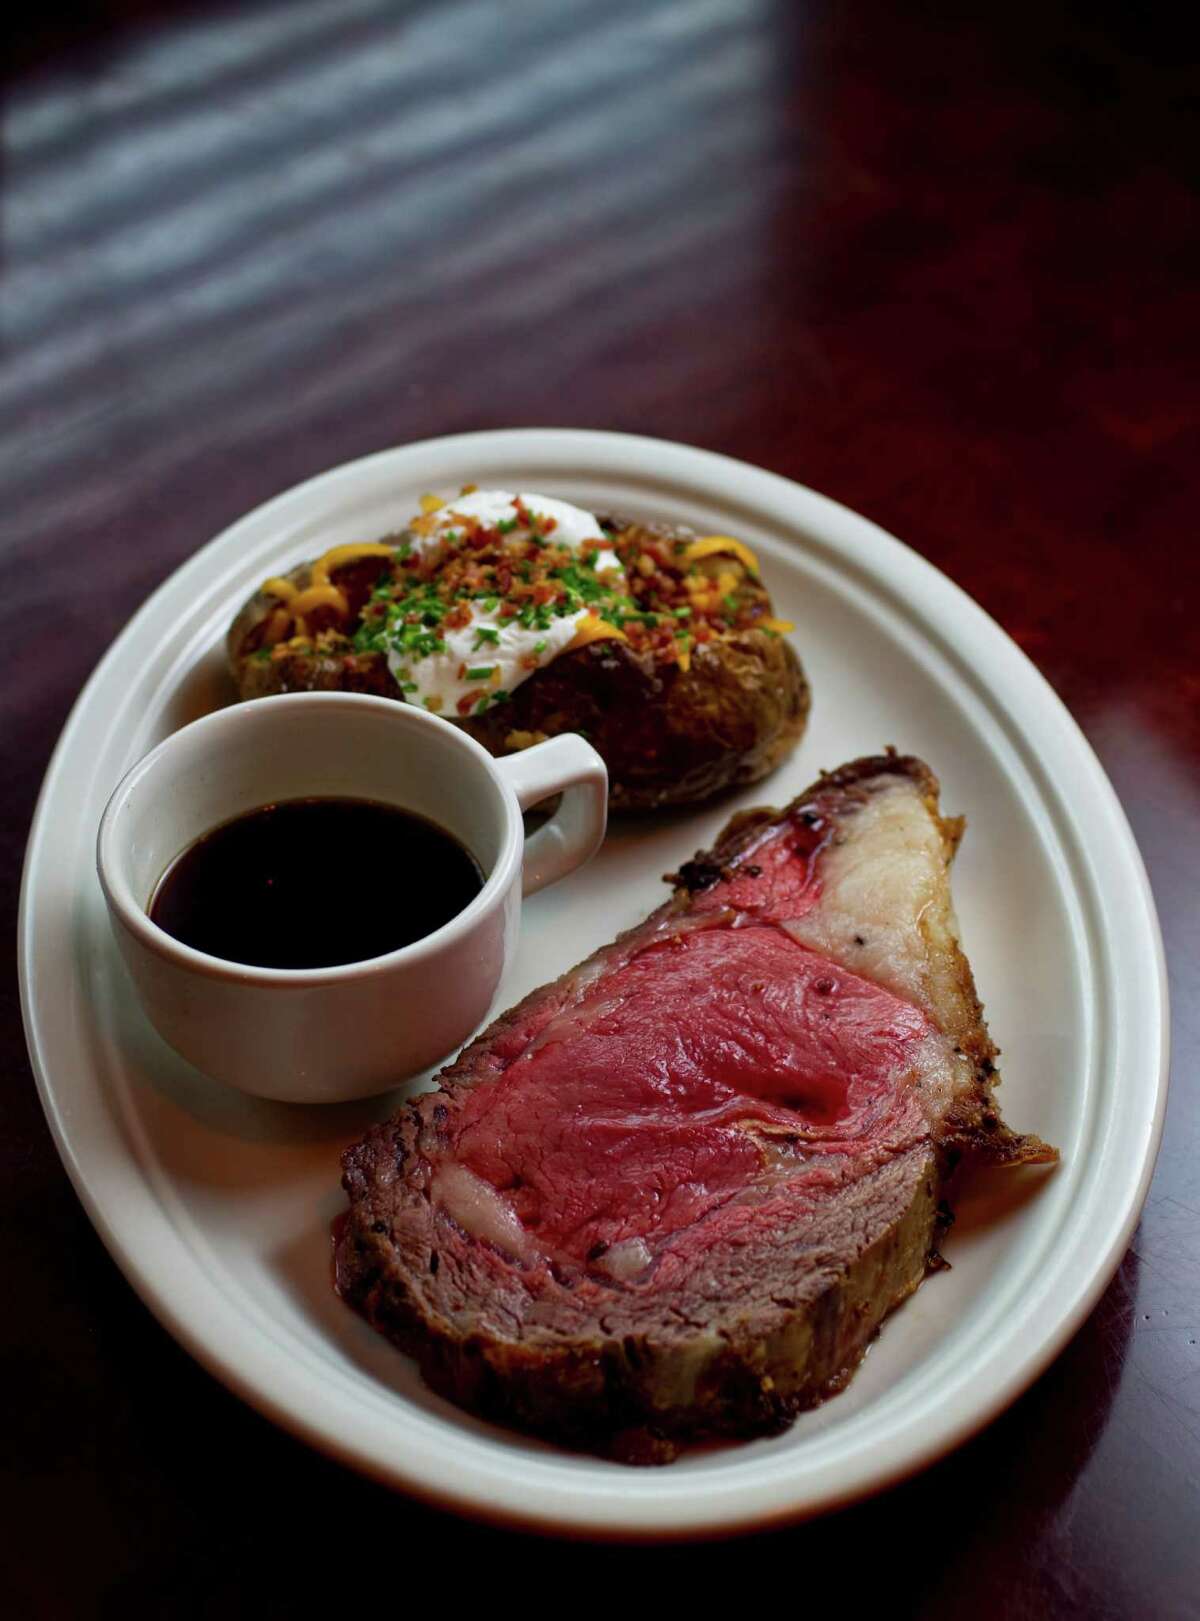 The Laurenzo family, owners of El Tiempo Cantina restaurants and Laurenzo’s on Washington, plan to open a second Laurenzo’s at 1910 Bagby in the former Republic Smokehouse location in Midtown. They expect to open before the Super Bowl. Shown: The Prime Rib with au jus and a loaded baked potato at Laurenzo's, 4412 Washington.